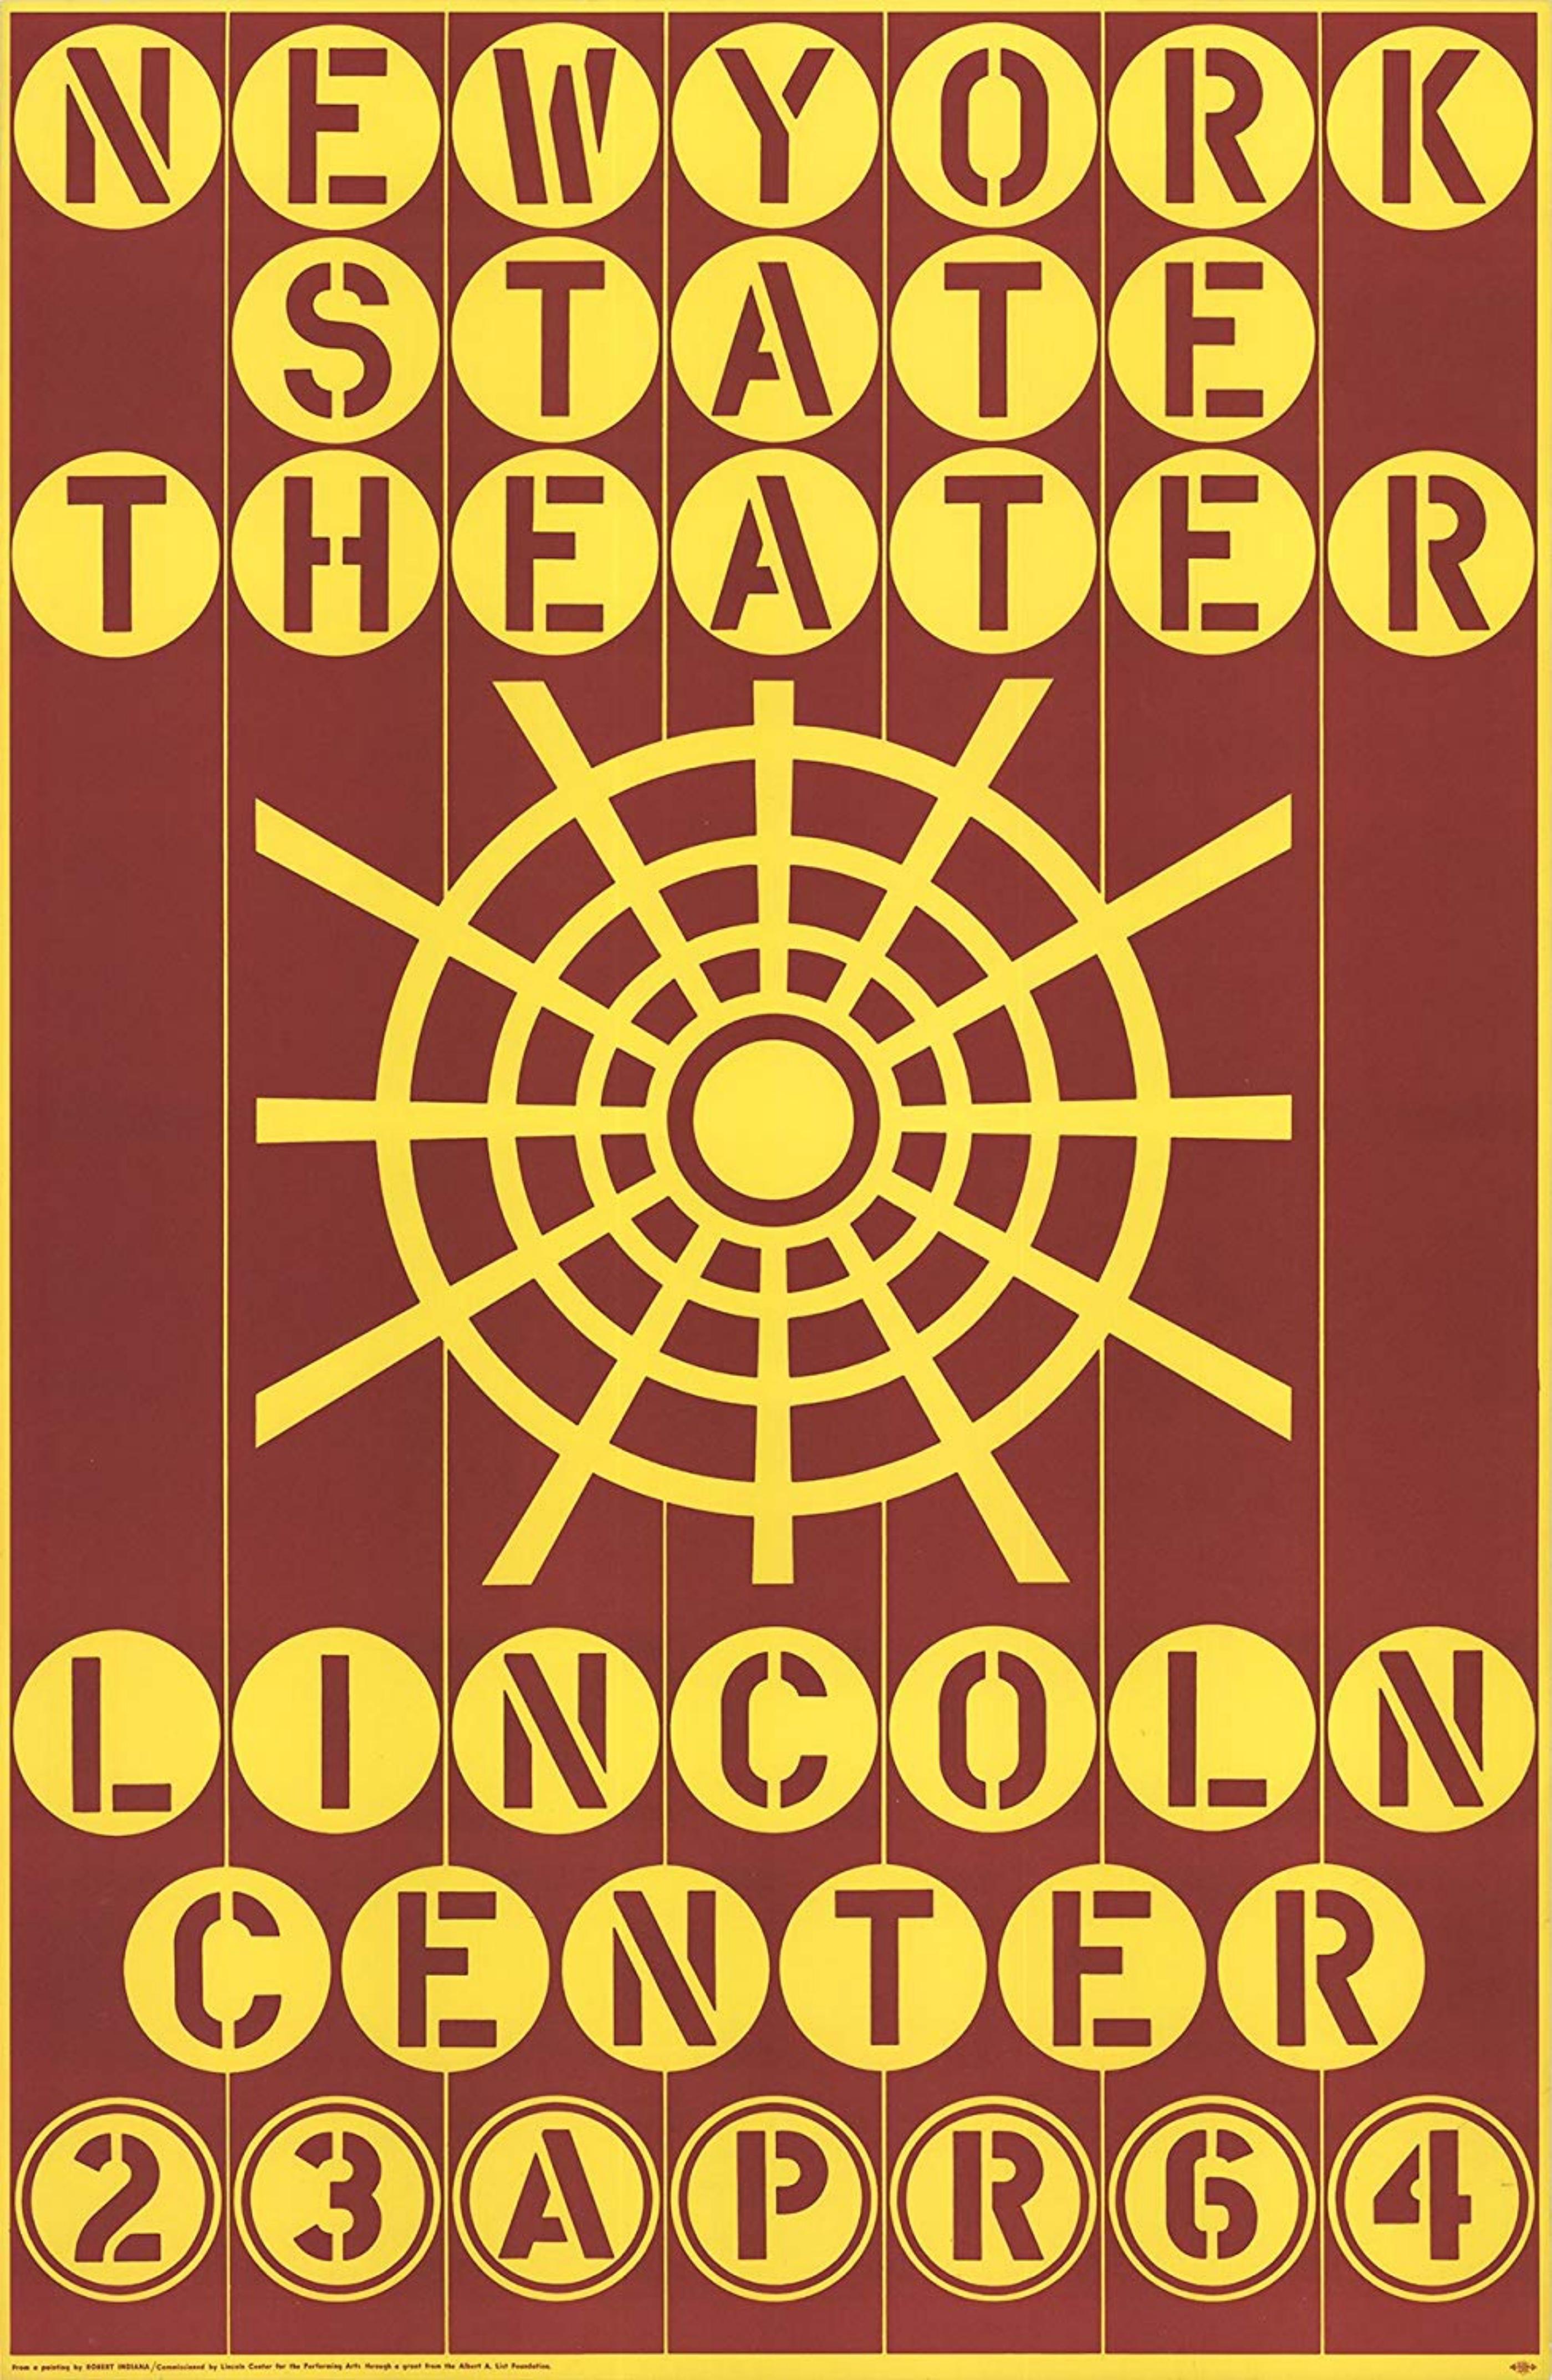 Robert Indiana Abstract Print - New York State Theater, Lincoln Center, New York, Limited Edition 1960s poster